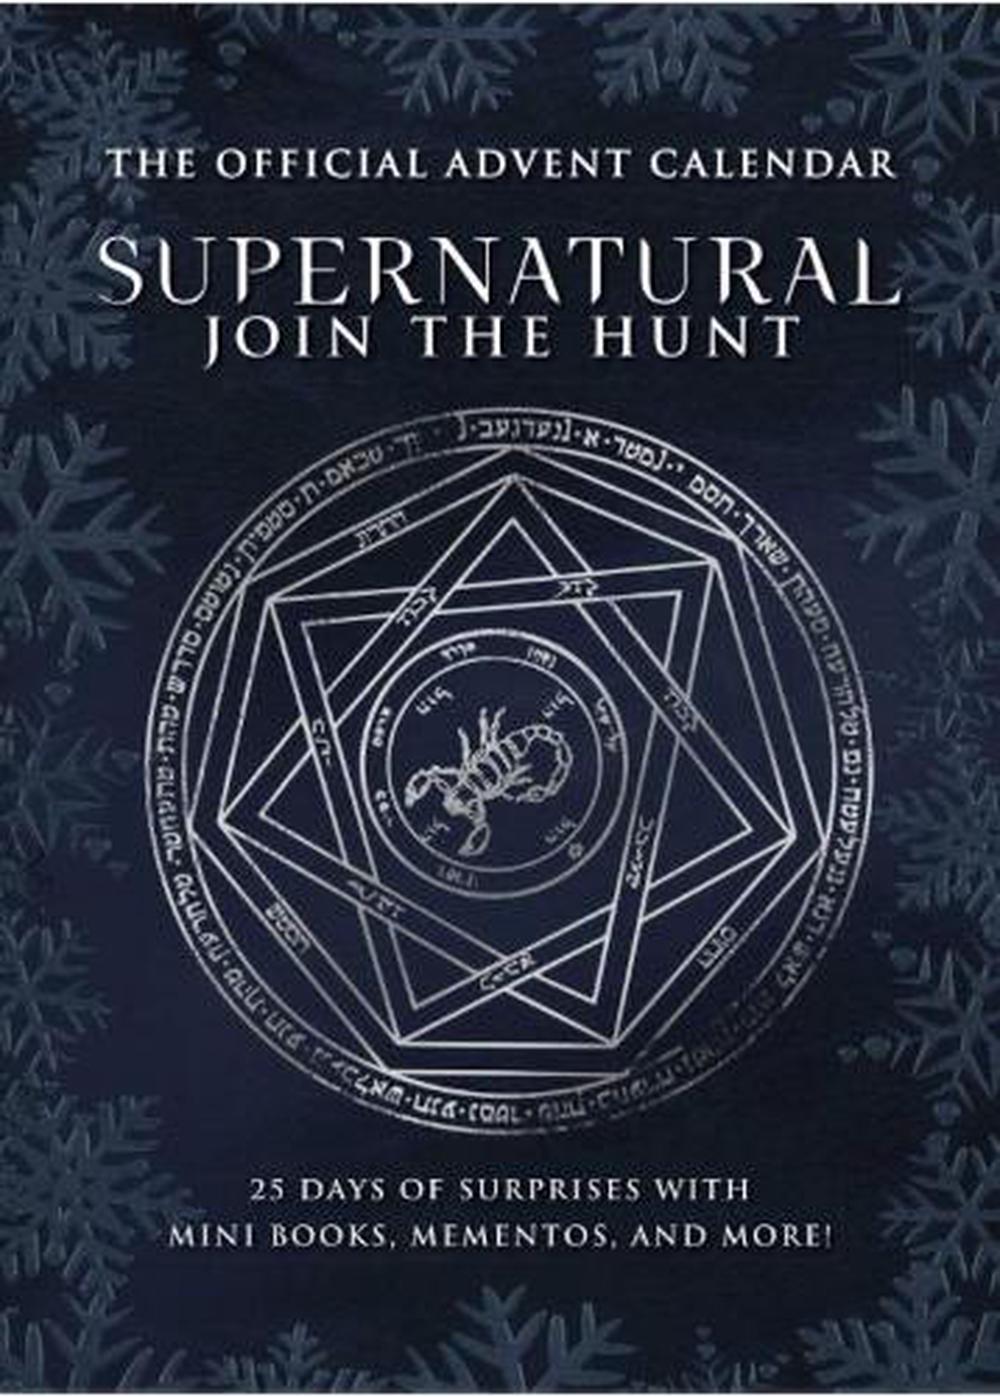 Supernatural the Official Advent Calendar Buy online at The Nile